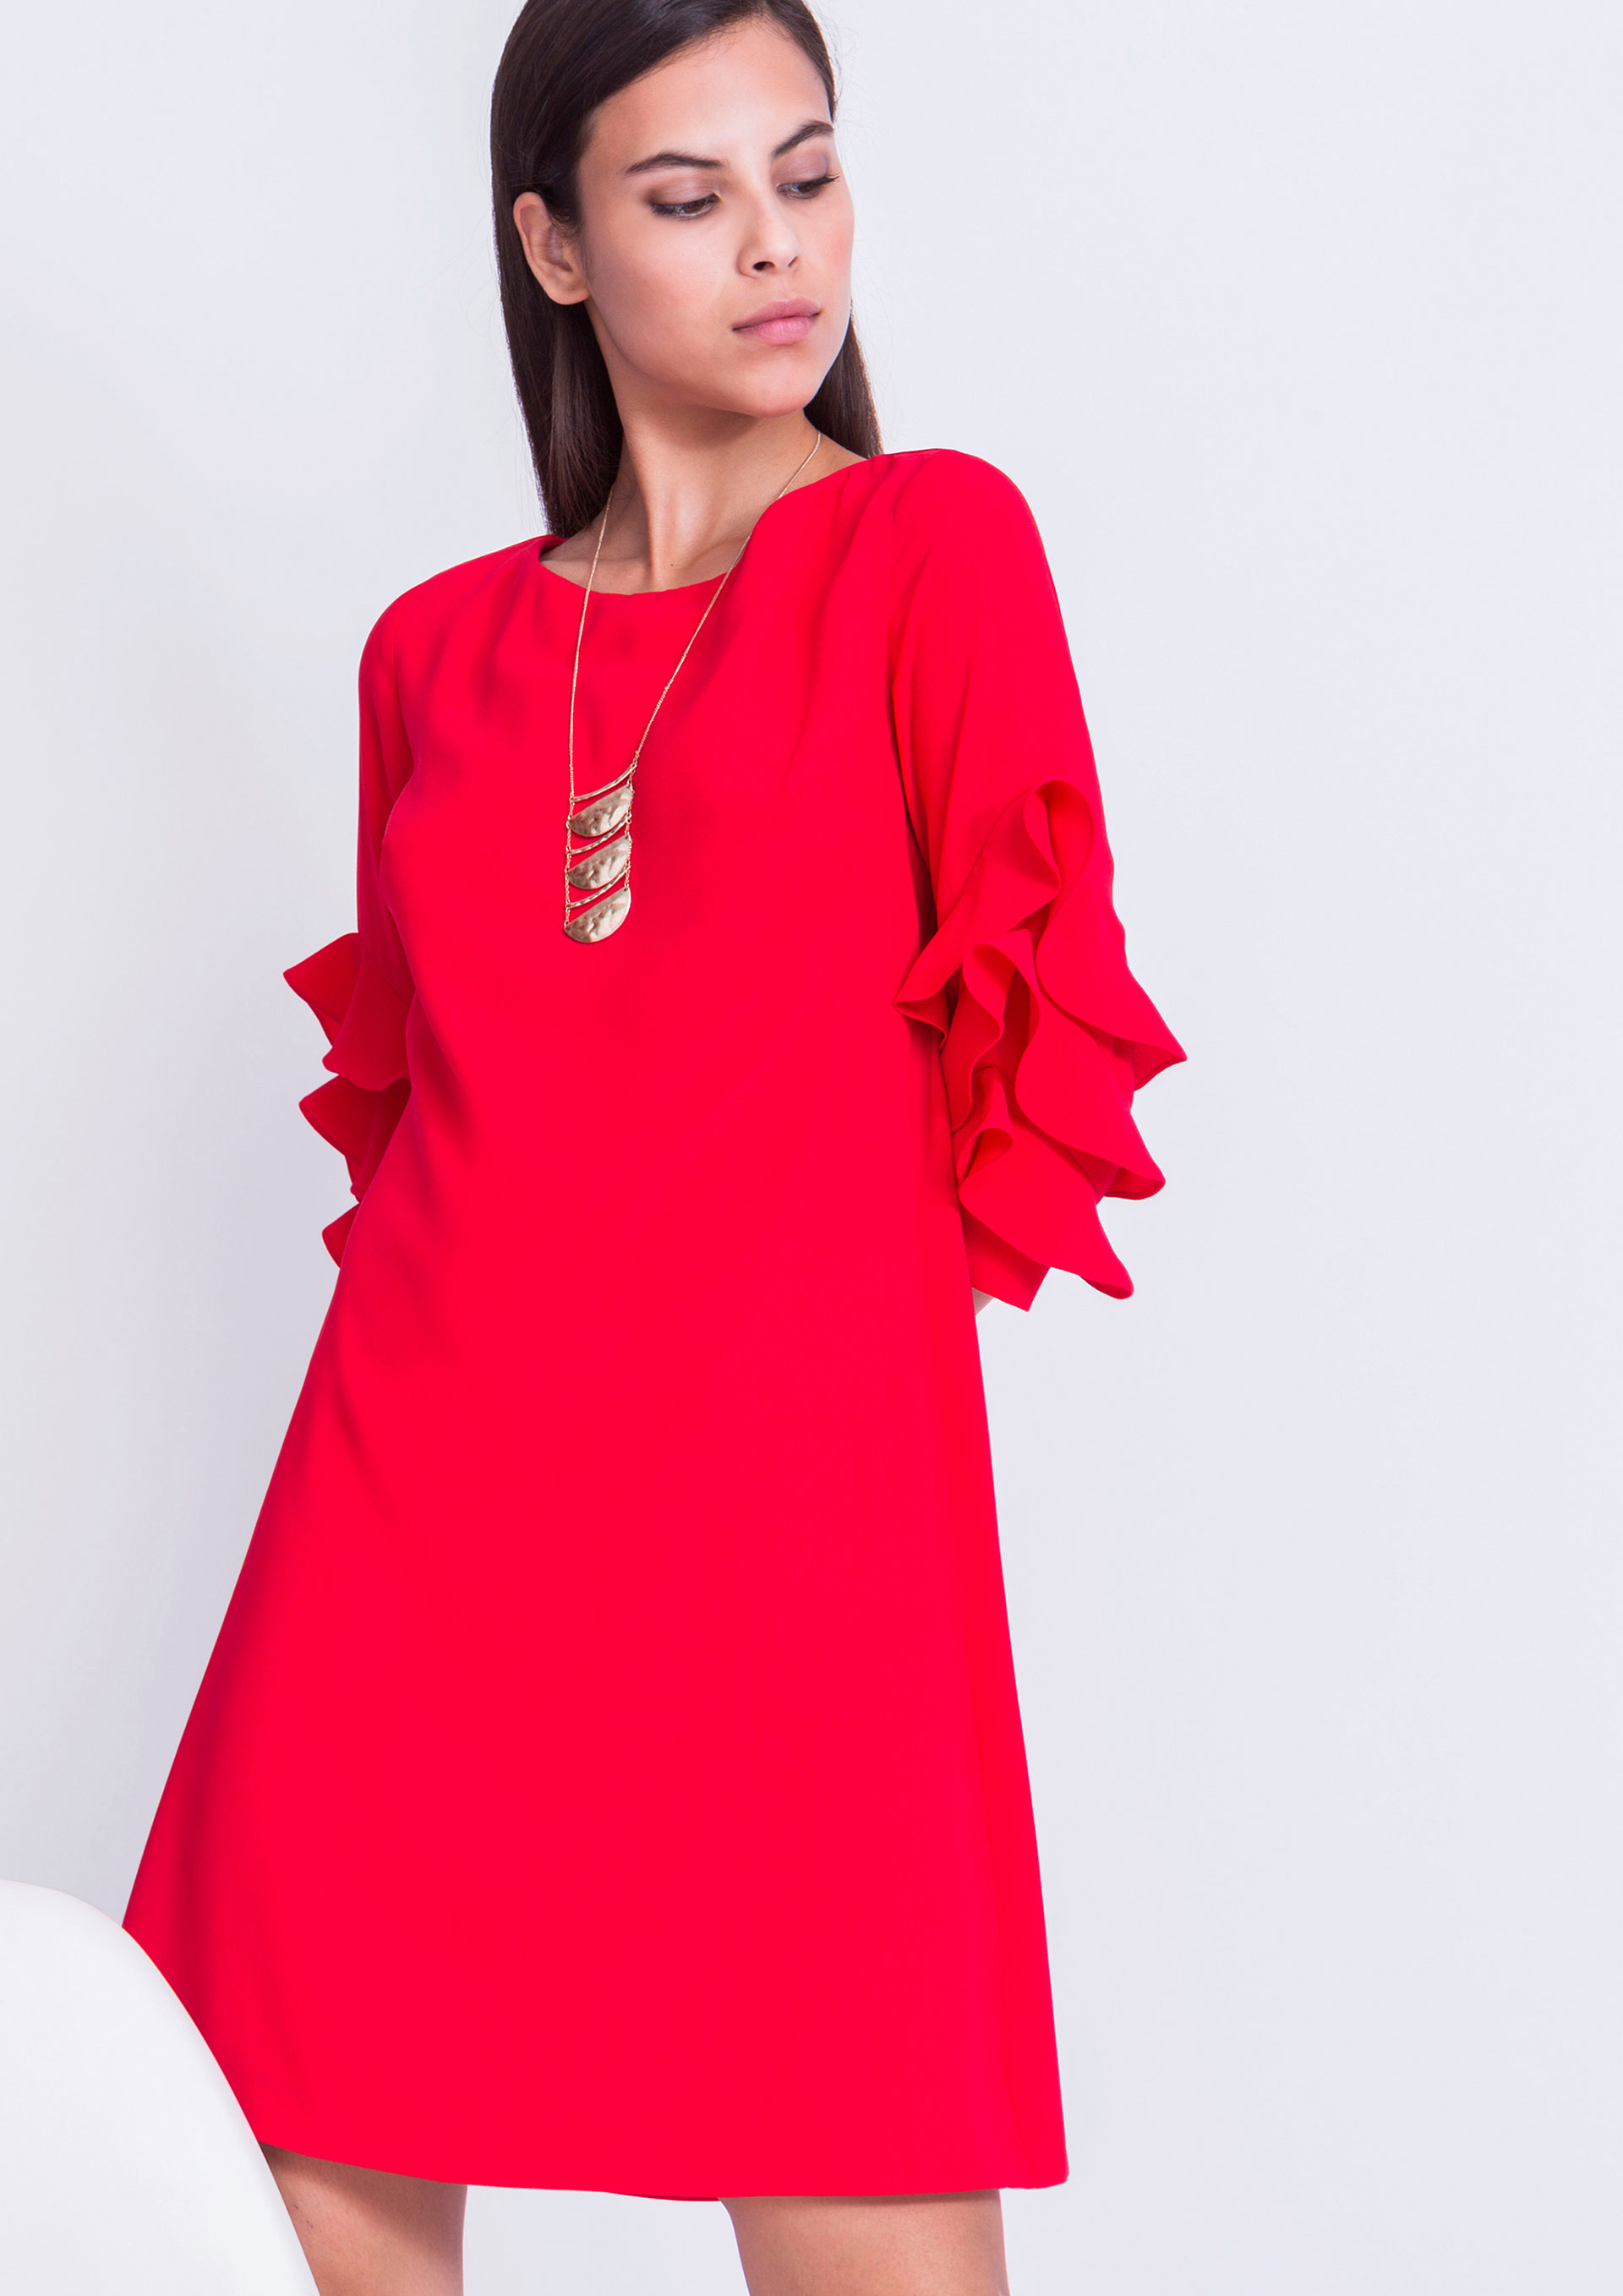 Red dress with frill on sleeves